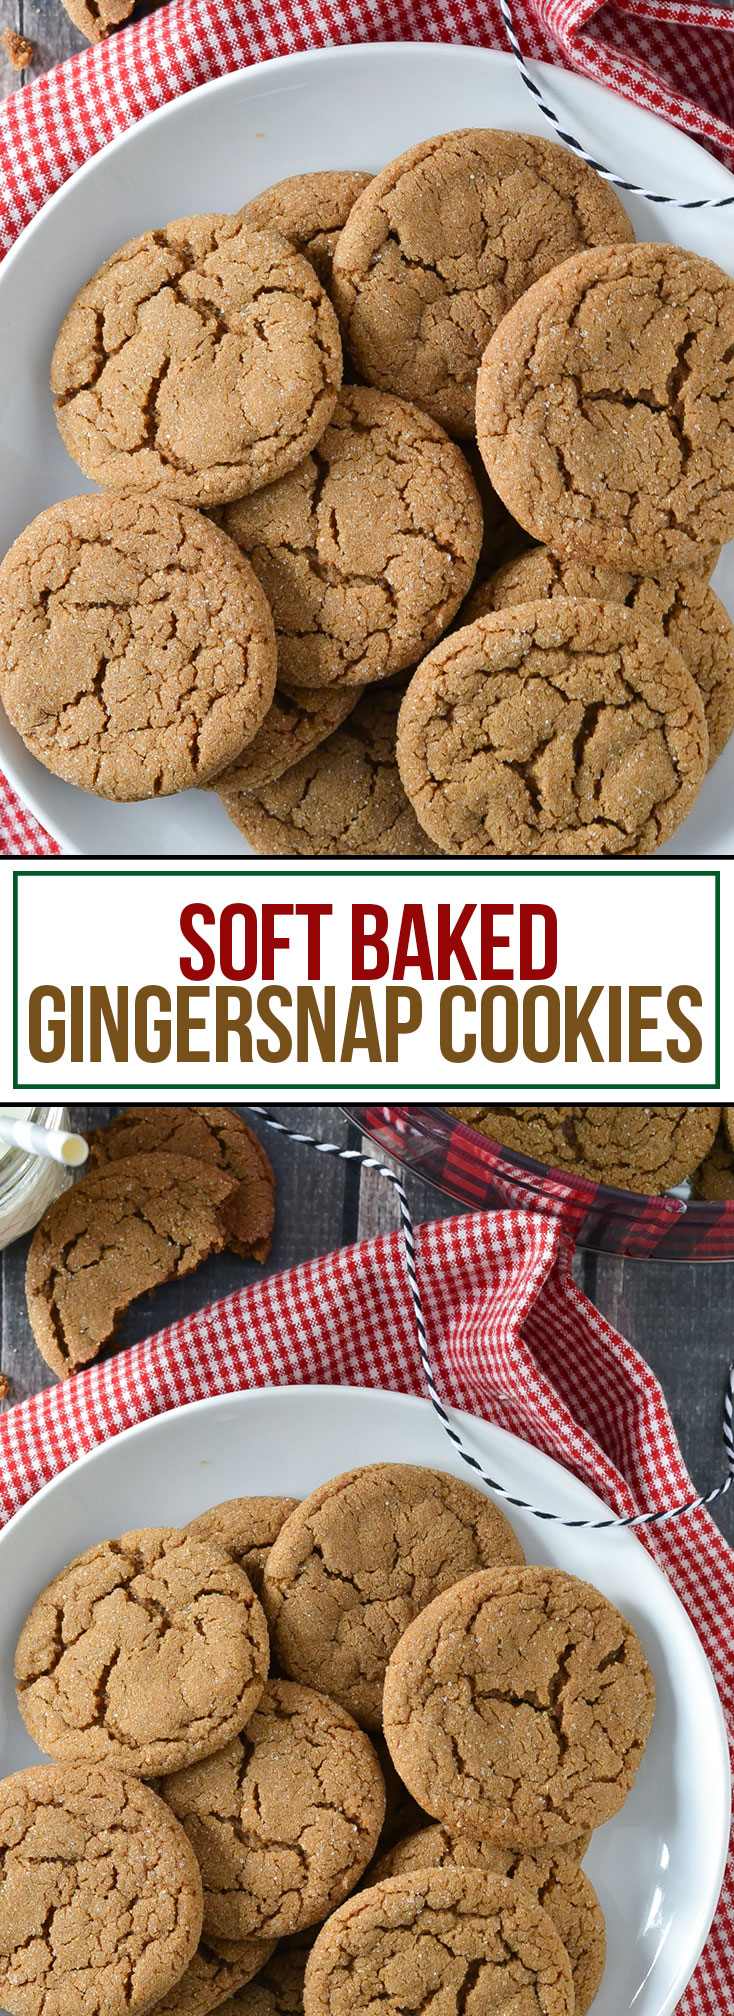 THE BEST SOFT BAKED GINGERSNAP COOKIES